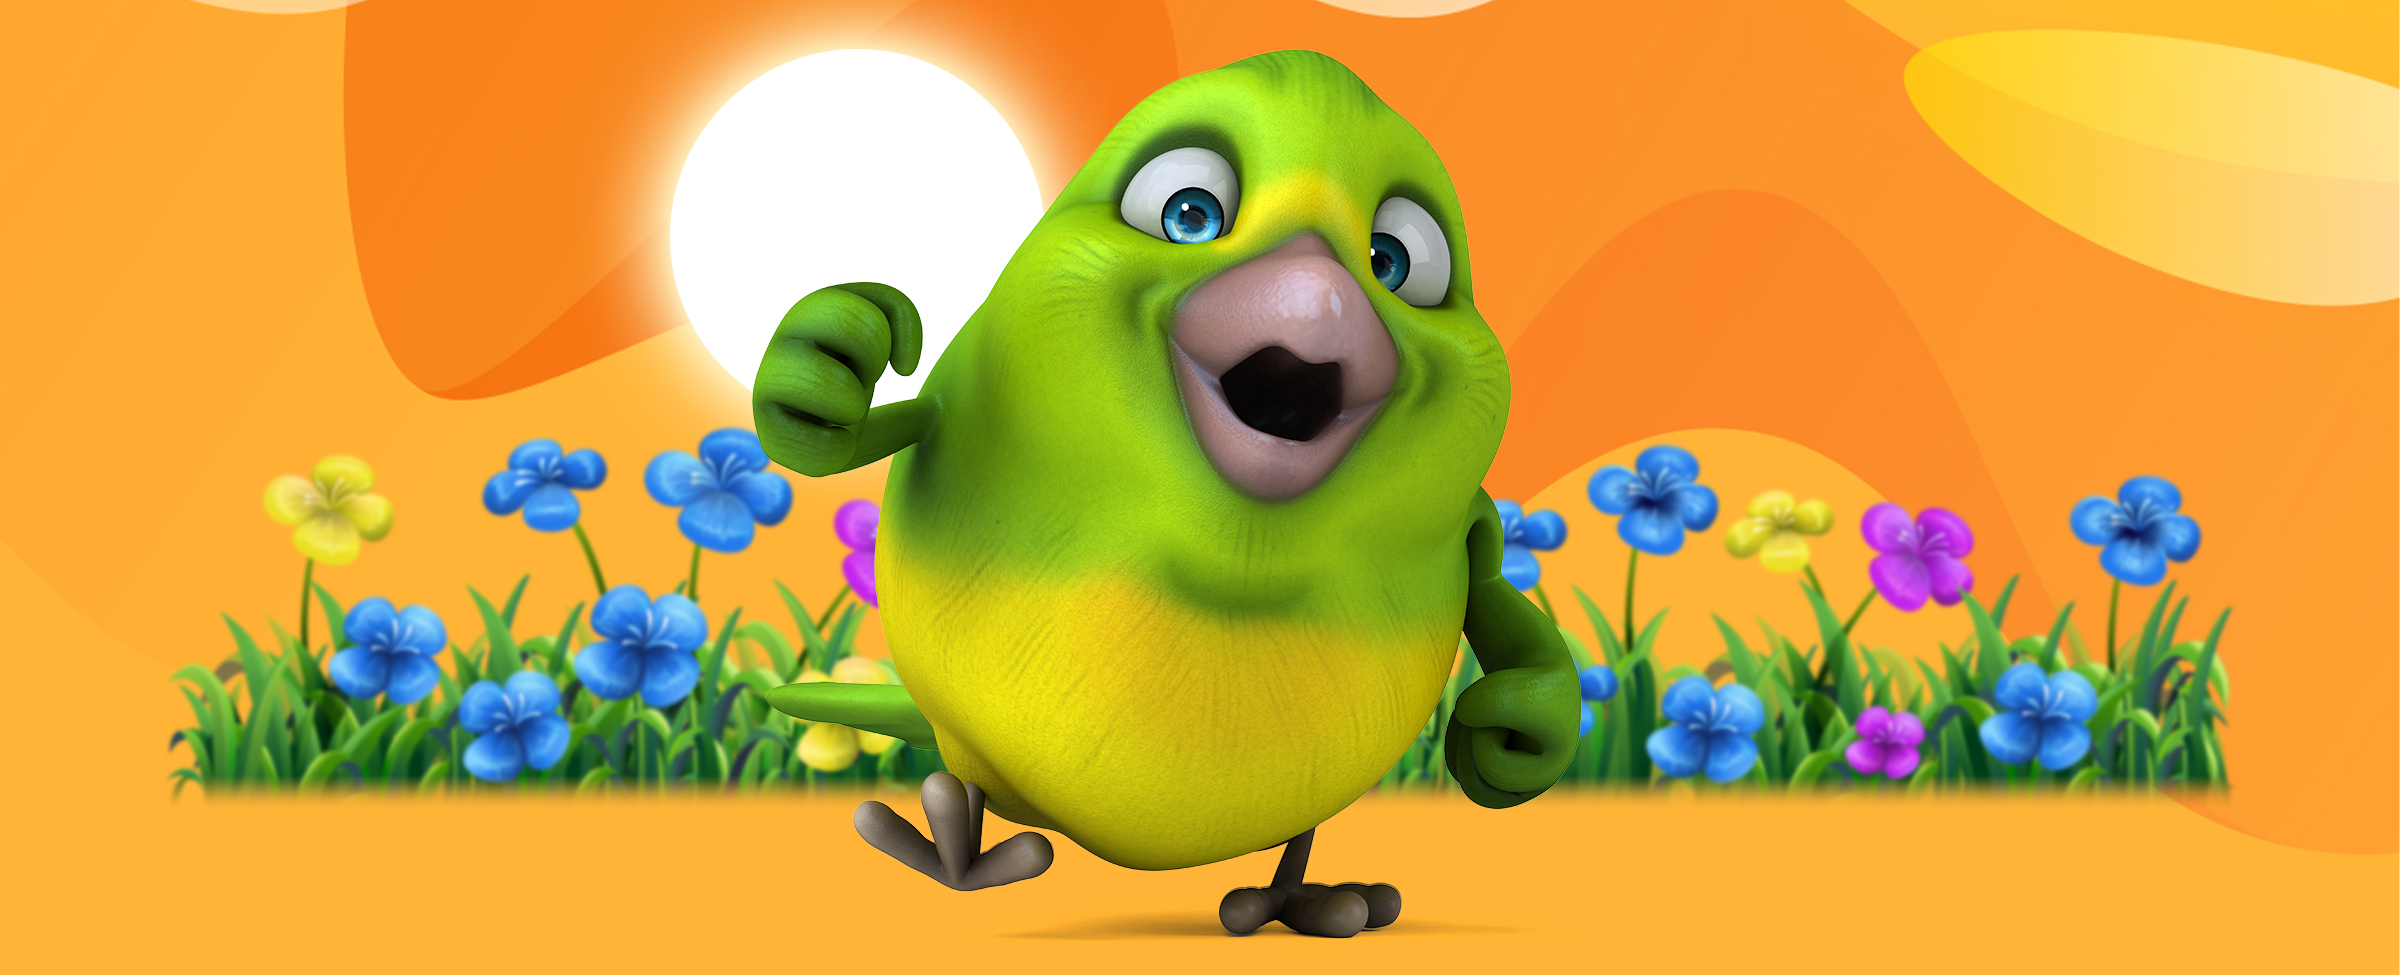 A 3D-animated yellow and green chick with a gray beak, inspired by games at SlotsLV Casino, stands in front of a flower bed, while the sun beats down from behind against a yellow background.